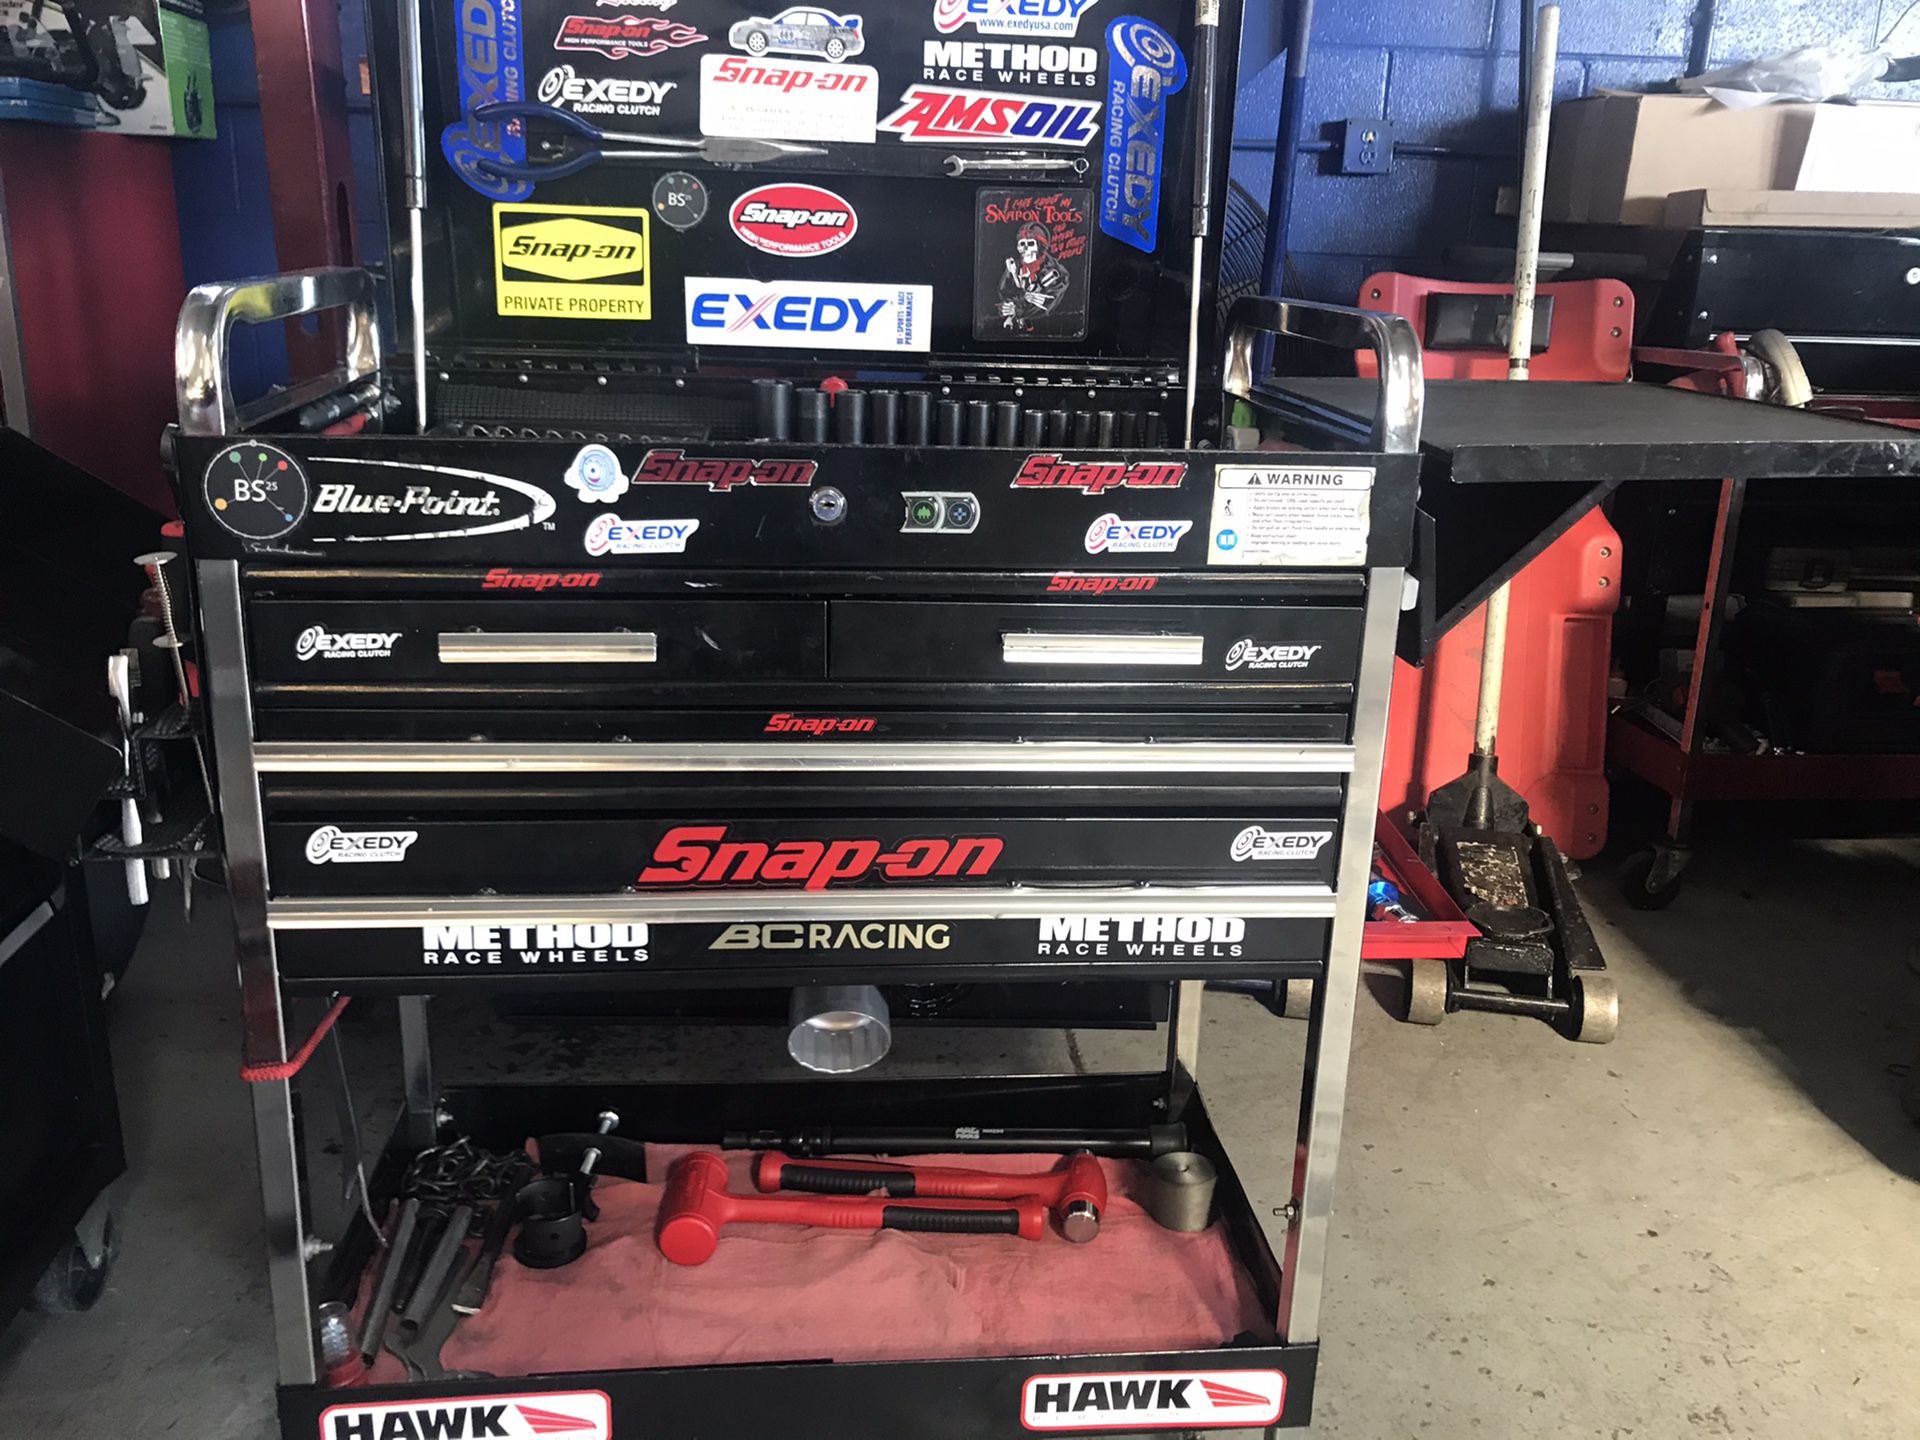 Blue point /snap on tools cart (no tools)